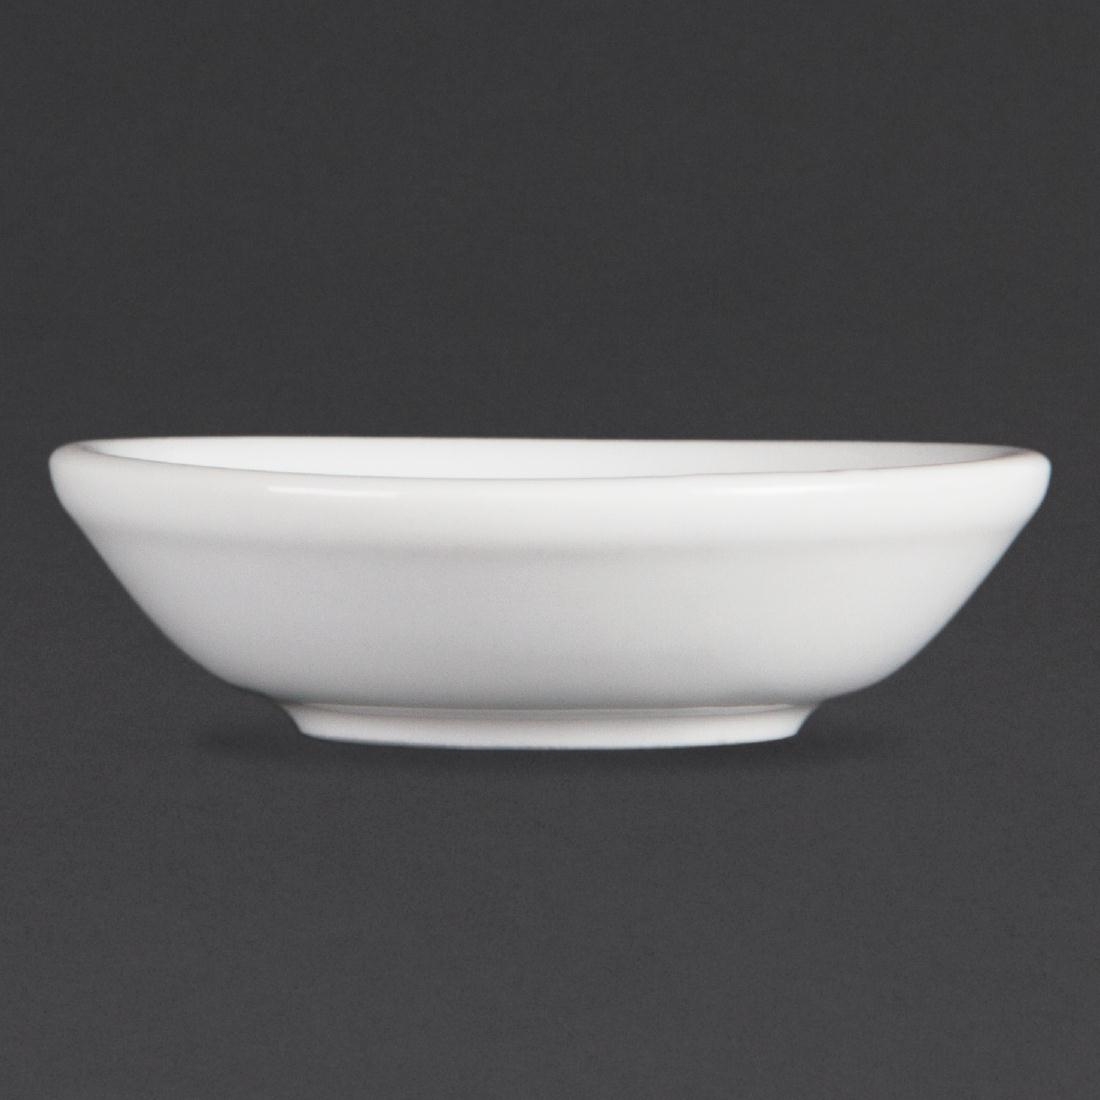 Olympia Whiteware Soy Dishes 74mm